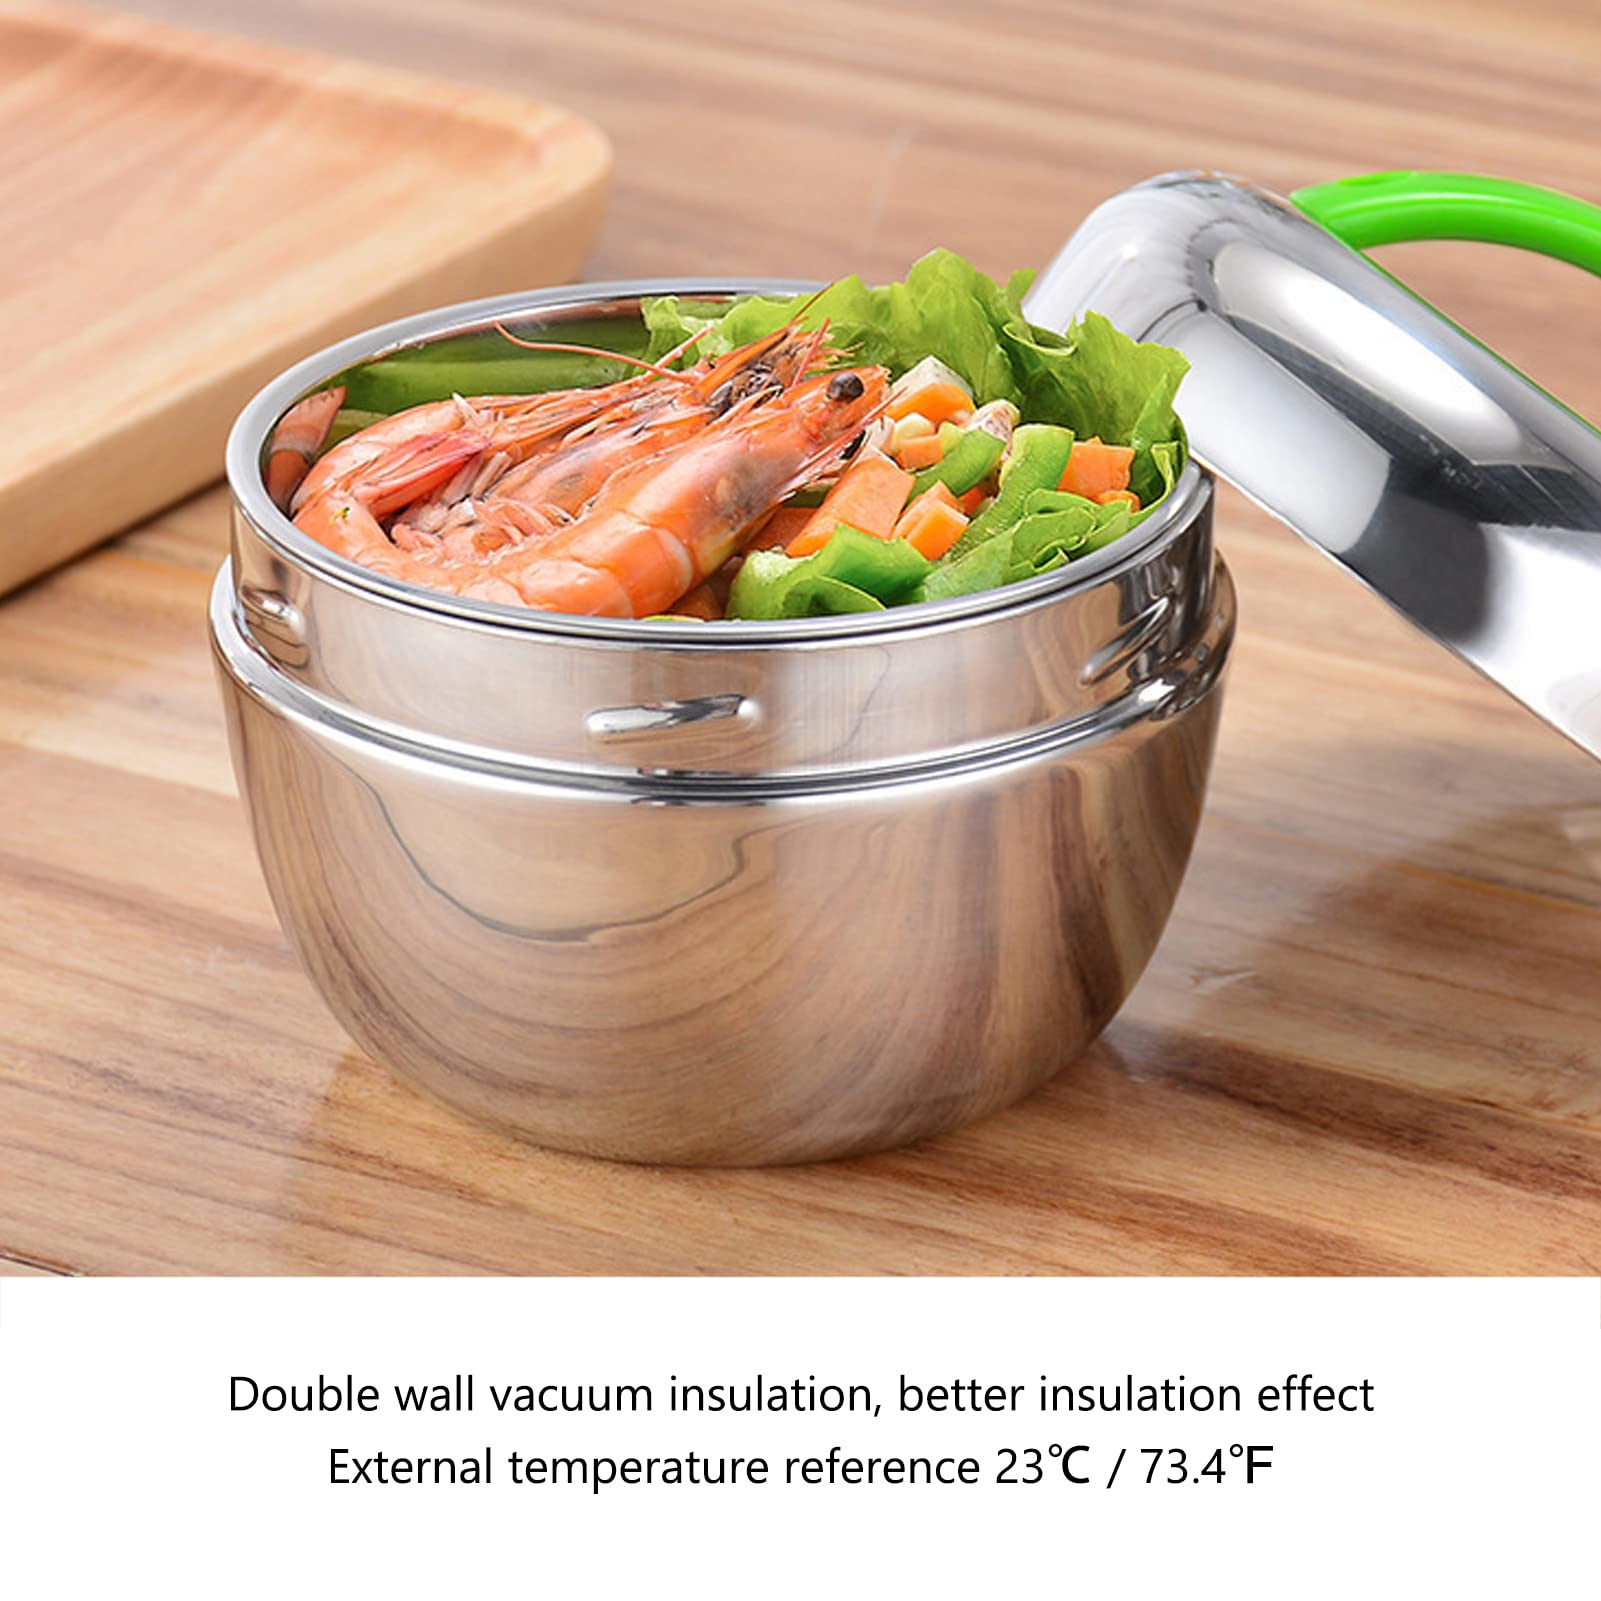 Stainless Steel Insulated Lunch Box 1.3L 44Oz Li Silver Container with Insulation Lunch Container Container Jar for Boxed Insulating Insulated Food Jars